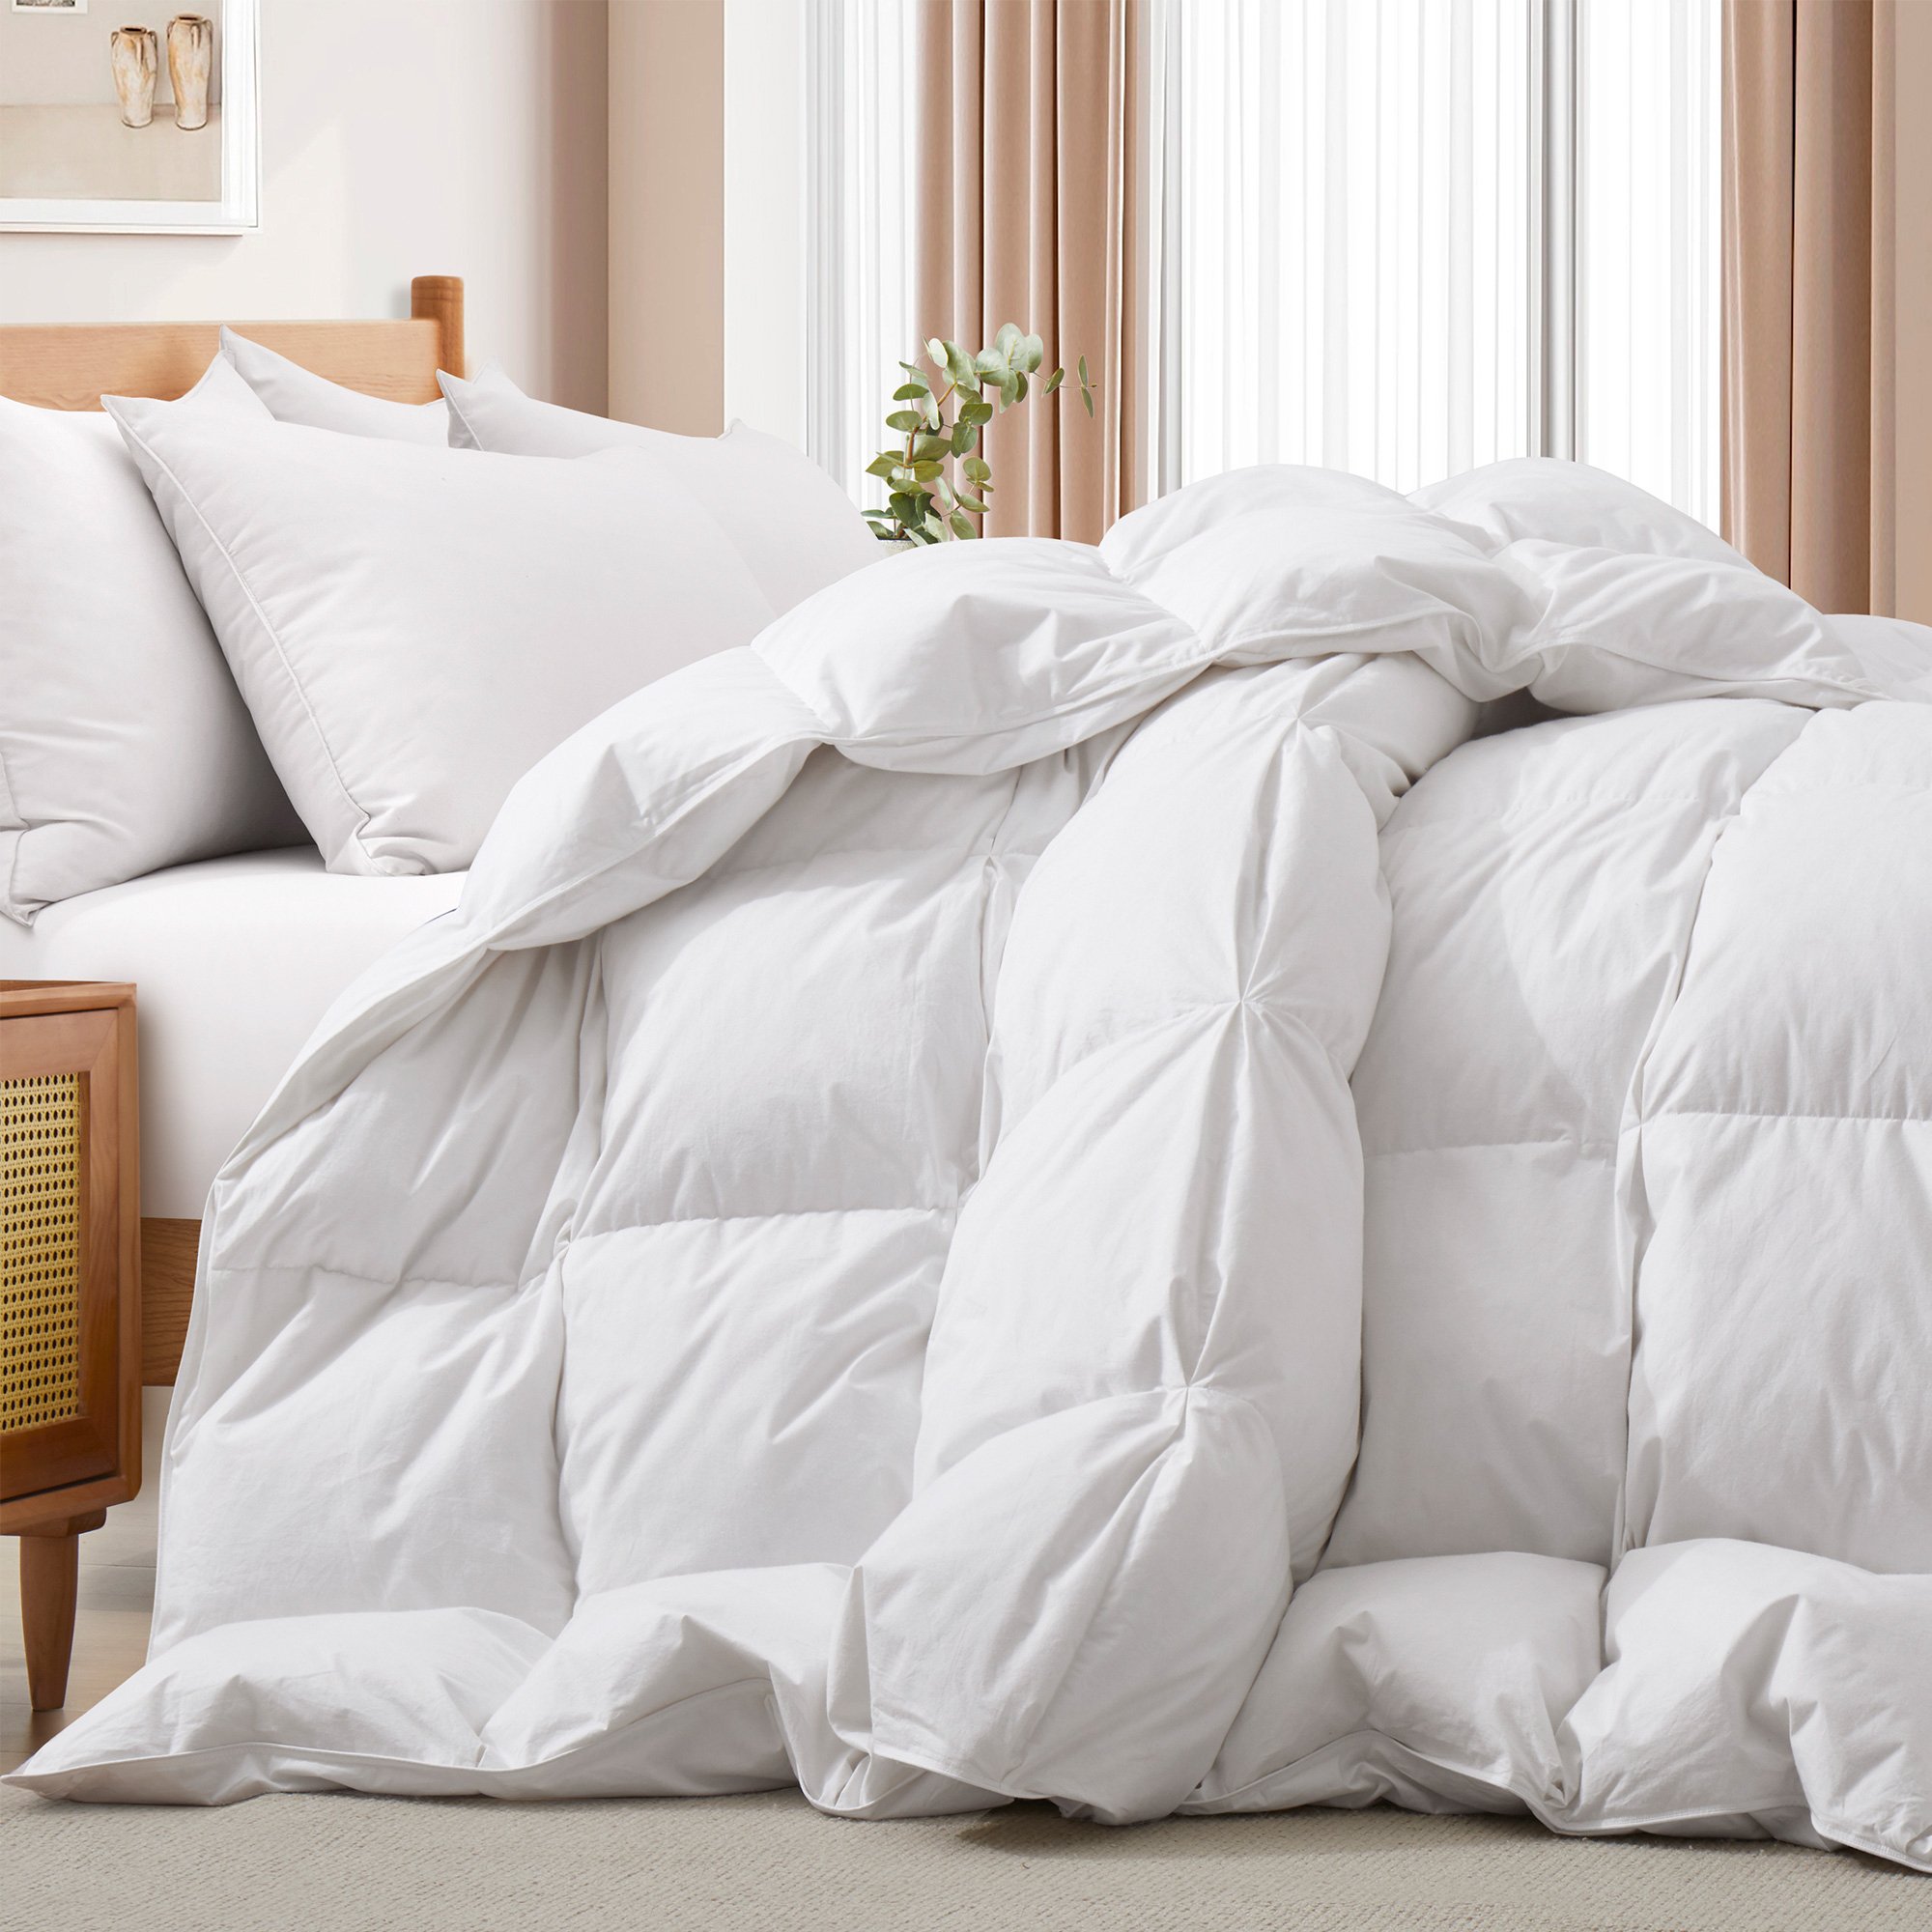 All Seasons Goose Down Comforter With Cotton Cover Baffled Box Design-Luxury Duvet Insert - King-104*90